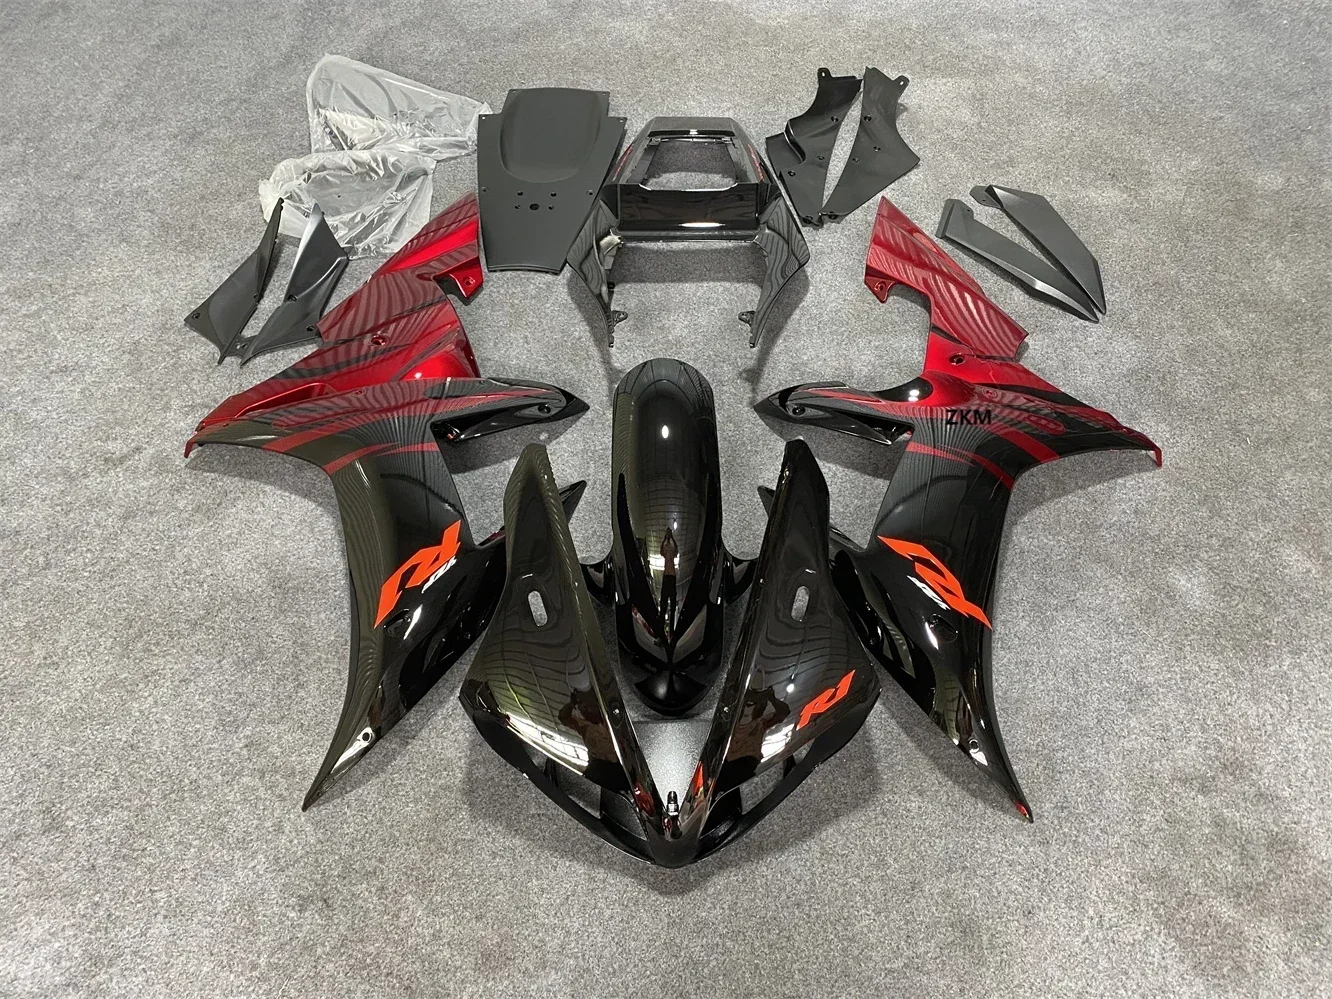 

Motorcycle Fairing Set Body Kit ABS Plastic For YZFR1 YZF-R1 YZF R1 YZF1000 2002 2003 Accessories Injection Full Bodywork